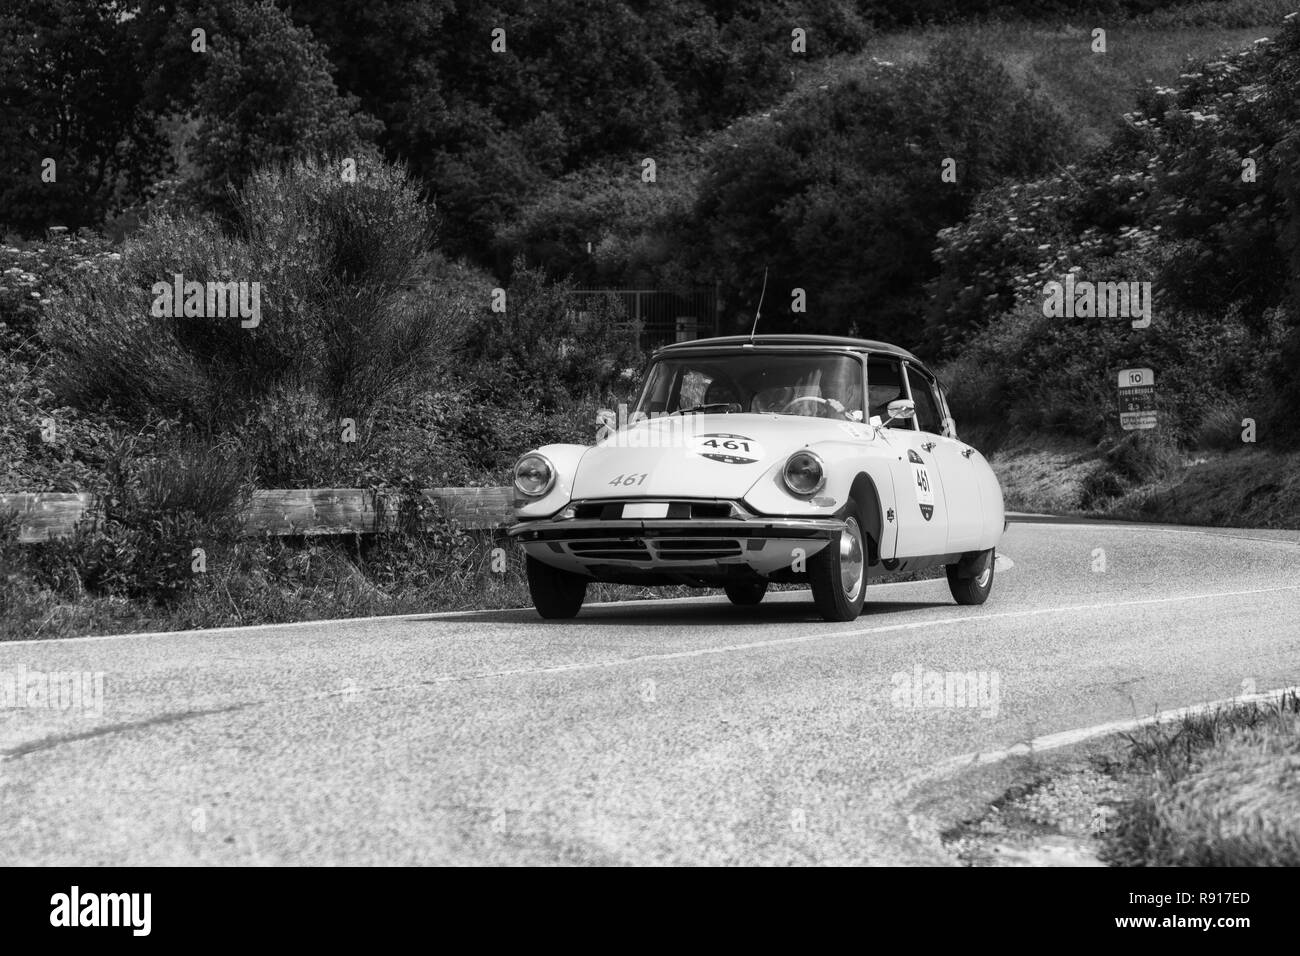 PESARO COLLE SAN BARTOLO , ITALY - MAY 17 - 2018 : CITROËN DS 19 1957 on an old racing car in rally Mille Miglia 2018 the famous italian historical ra Stock Photo